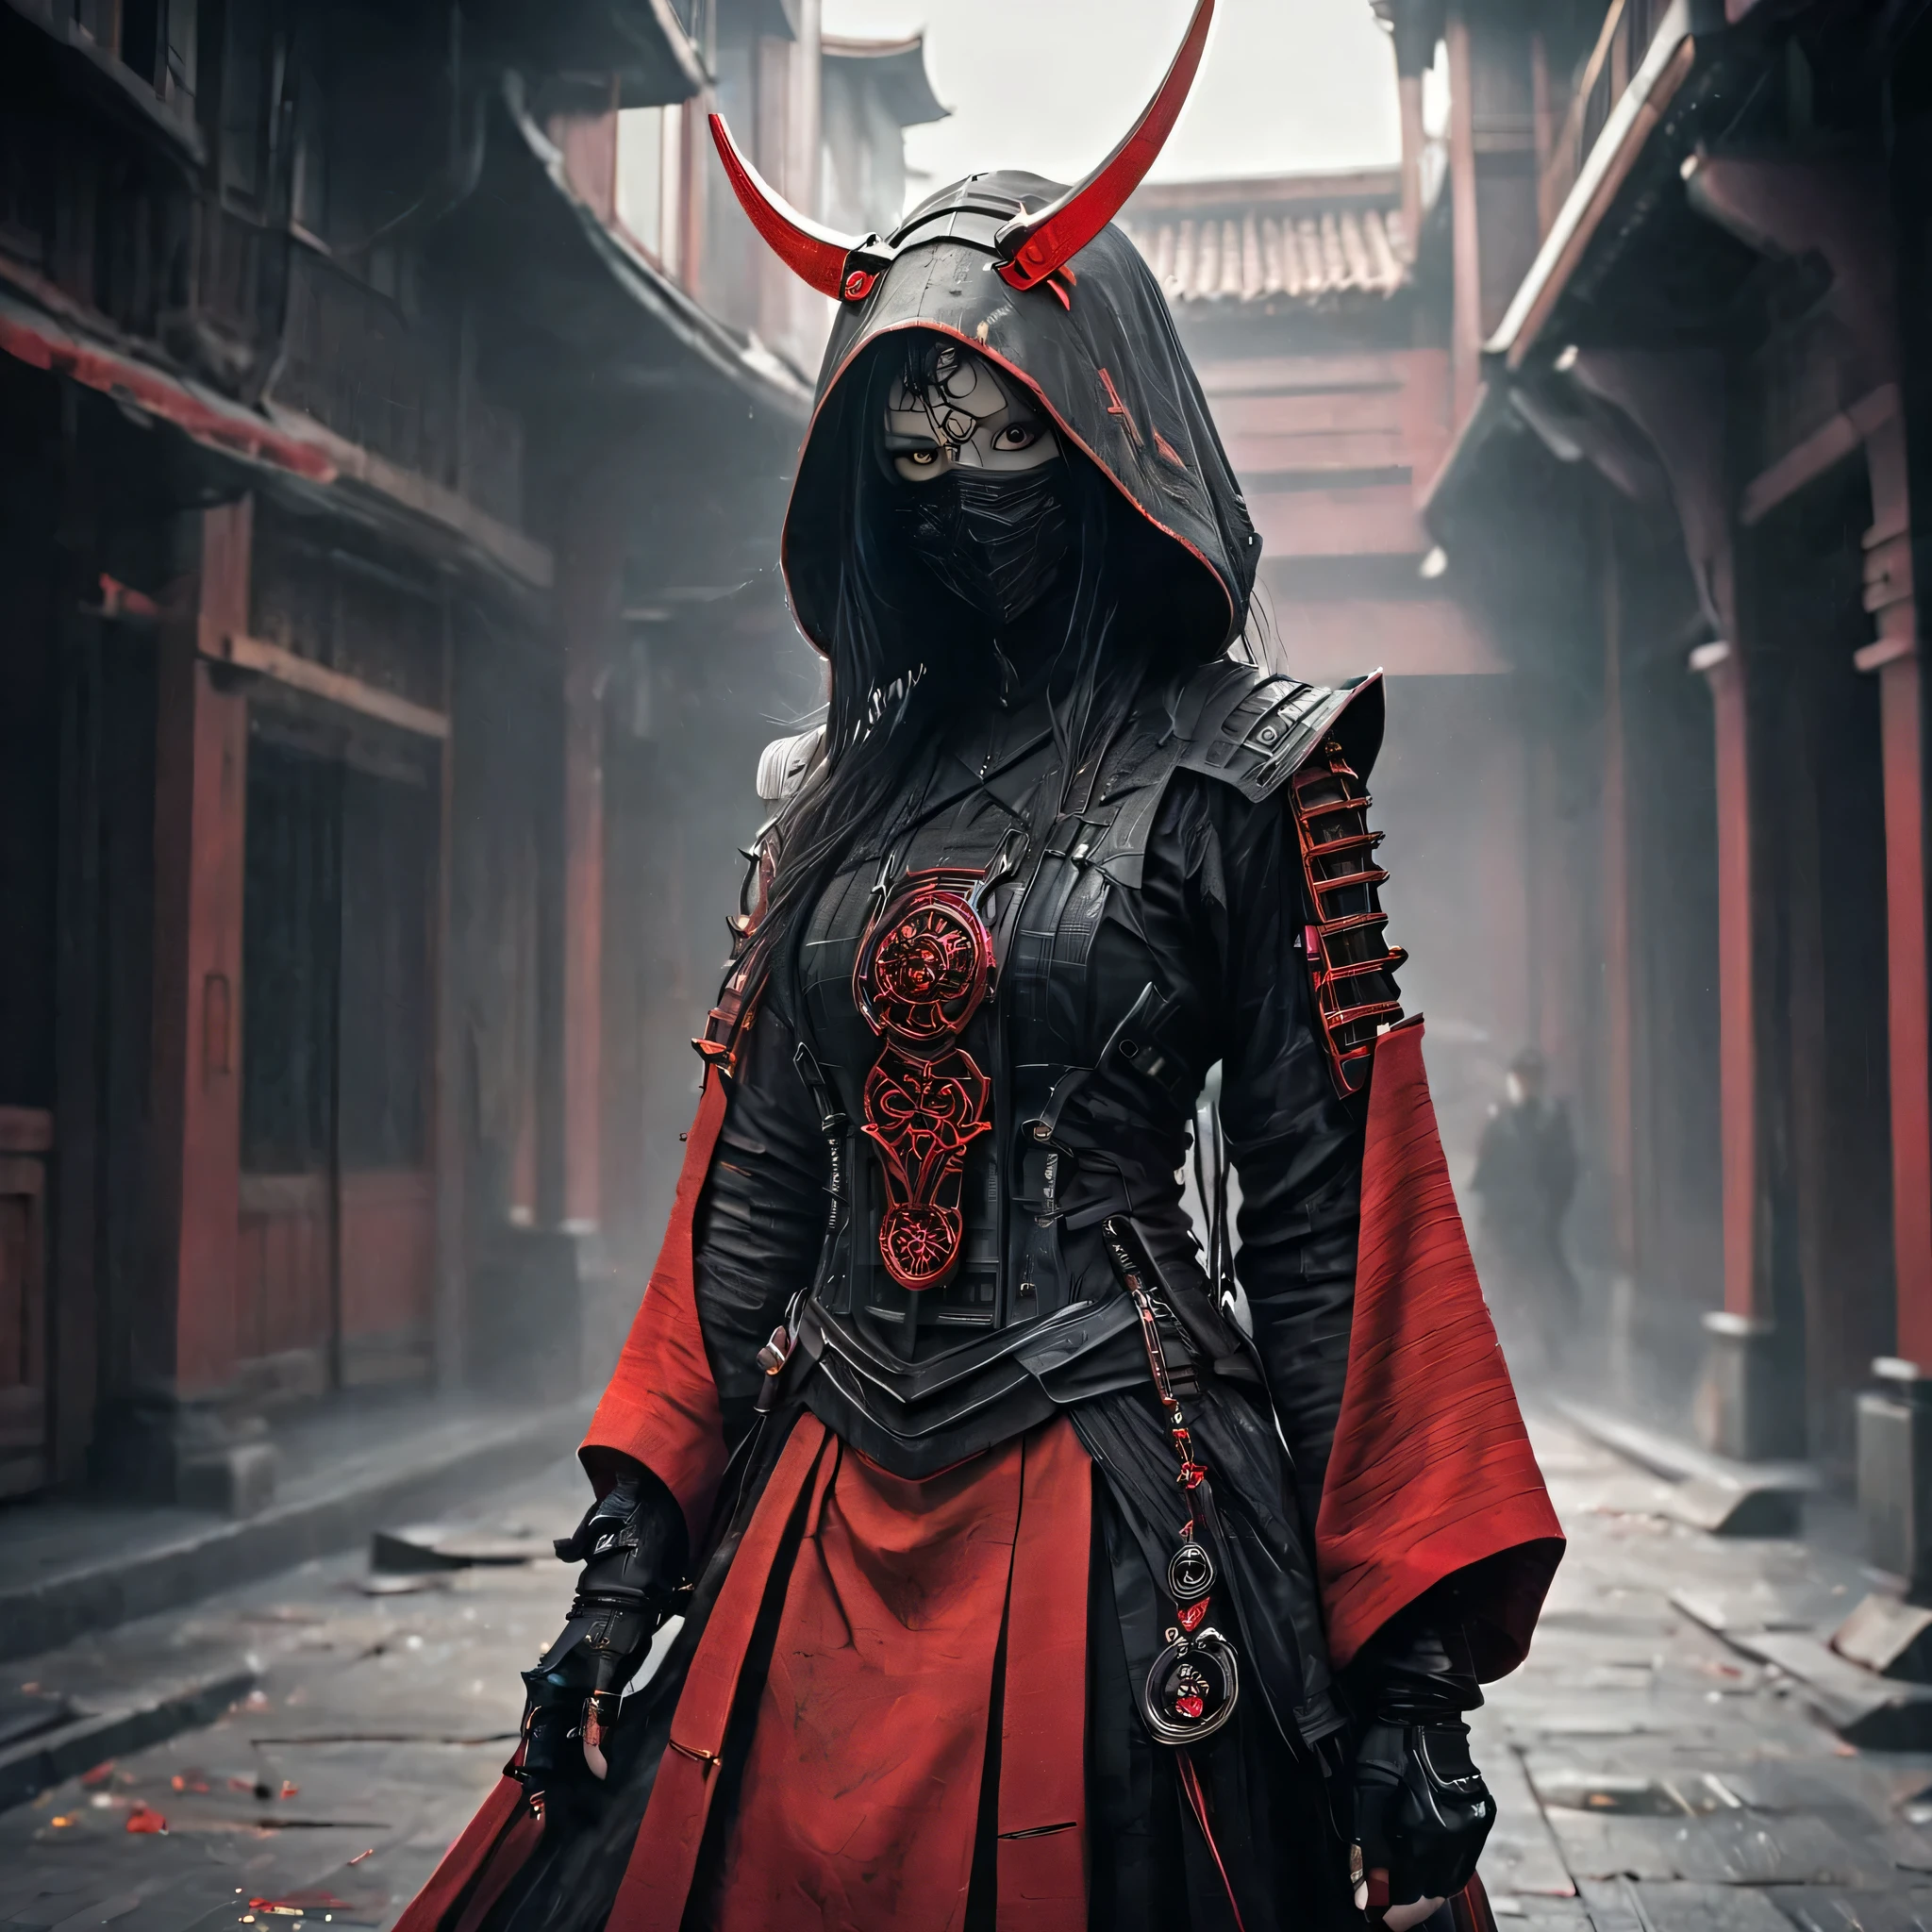 Arafed image of a person wearing scarlet clothing and a mask, Very beautiful cyberpunk samurai, gothic - cyberpunk, Orthodox cyberpunk, Rococo Cyberpunk, ornamental gothic - cyberpunk, Gorgeous cosplay, occult cyberpunk, Mysterious Post-Apocalyptic Cyborg, Steampunk Angel, Ultra-detailed fantasy characters, Steampunk aesthetics, Steampunk fantasy style, japanese gothic, Hypergoth, Beautiful female Grim Reaper